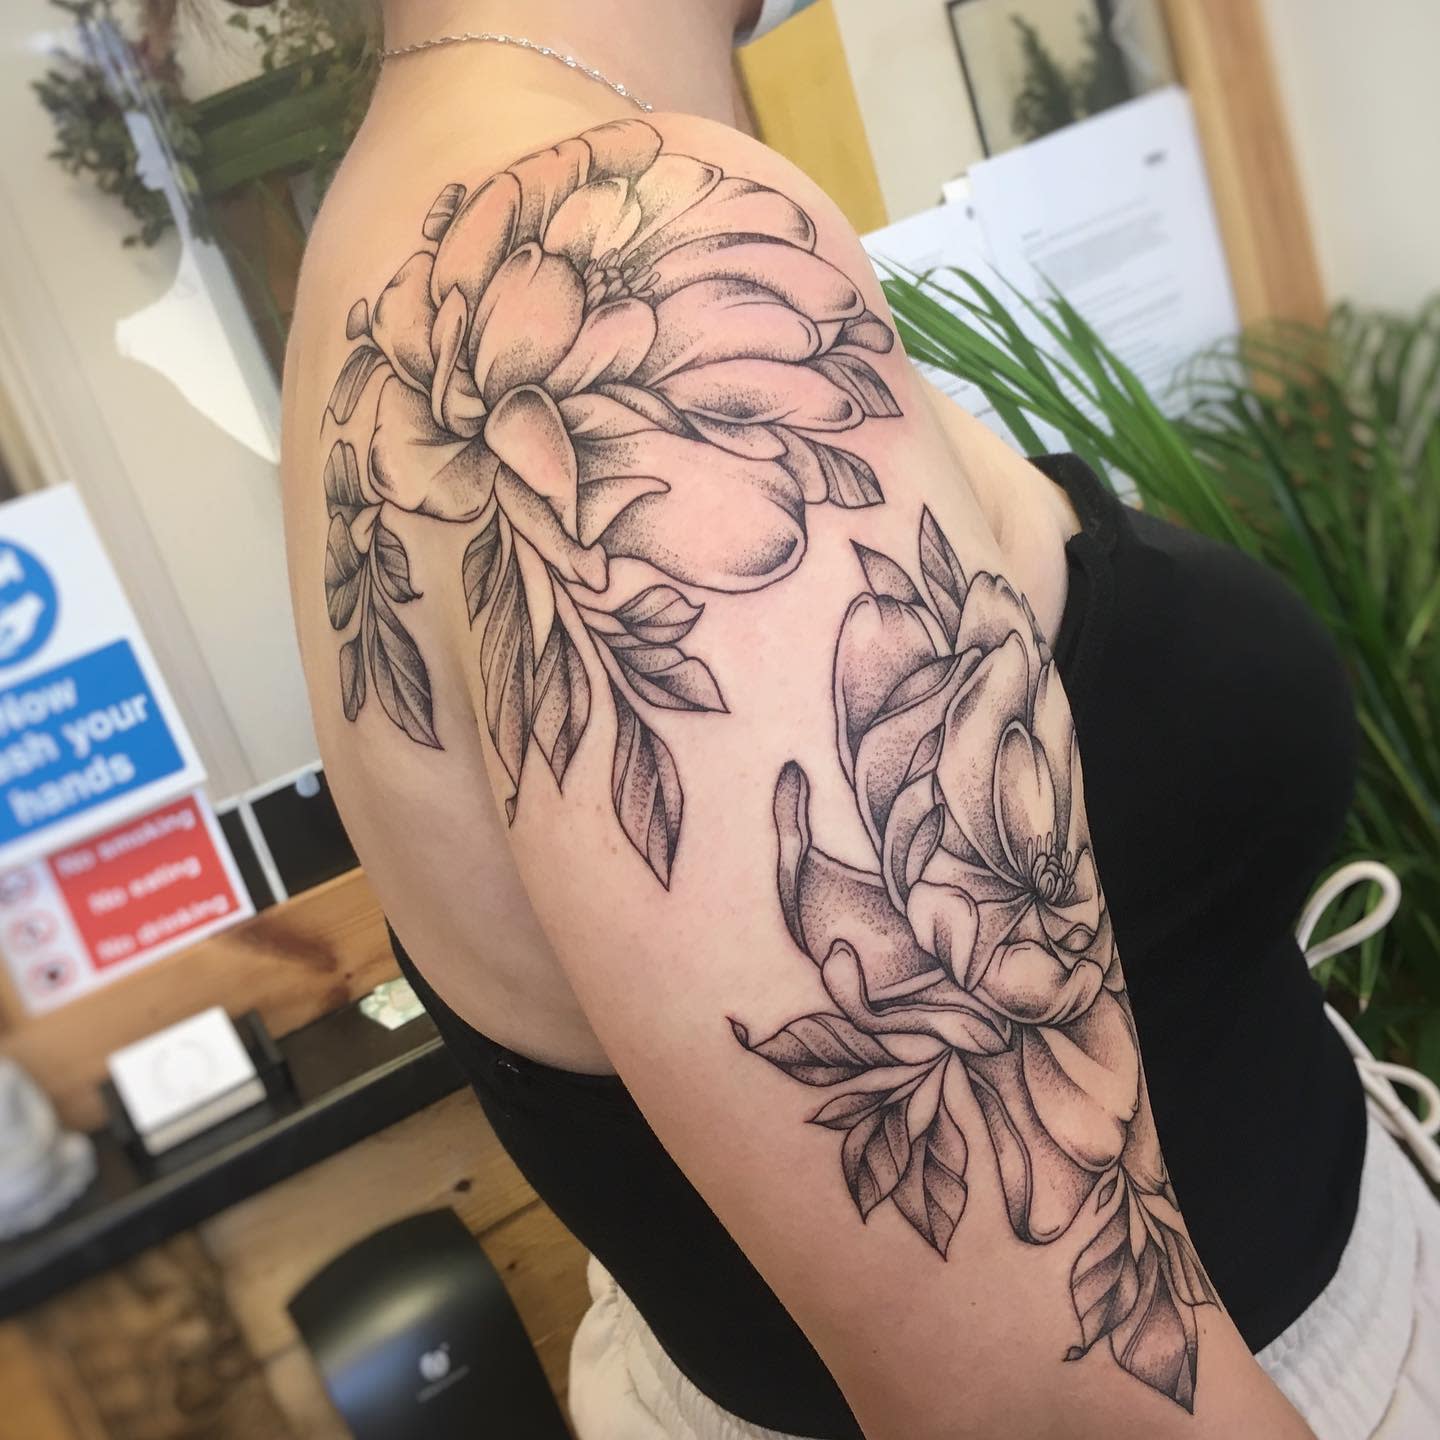 I love my botanical sleeve Ive wanted to get one for years and love how  it compliments my cherryblossom  Nature tattoos Botanical tattoo sleeve Sleeve  tattoos